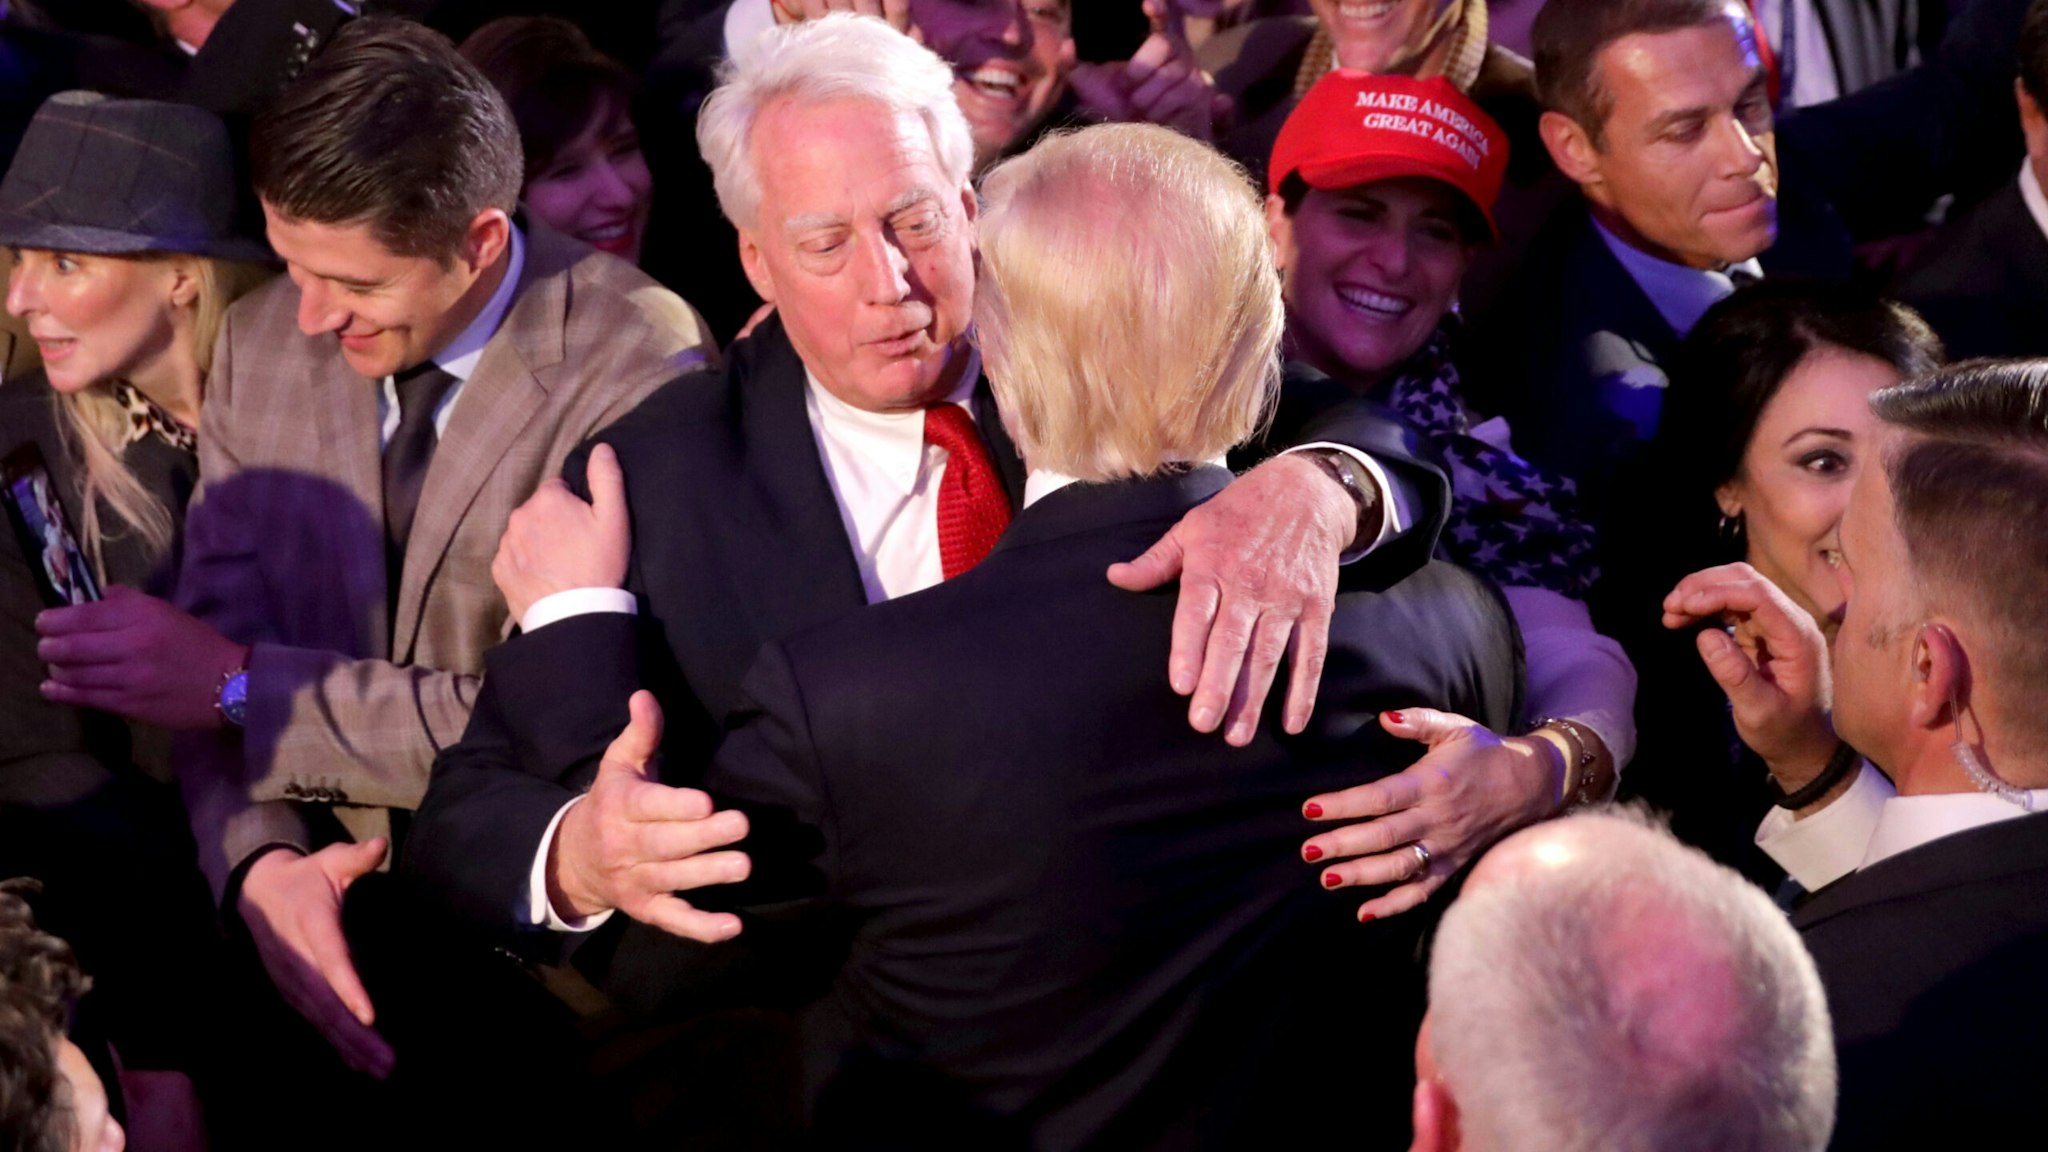 NEW YORK, NY - NOVEMBER 09: Republican president-elect Donald Trump hugs his brother Robert Trump after delivering his acceptance speech at the New York Hilton Midtown in the early morning hours of November 9, 2016 in New York City. Donald Trump defeated Democratic presidential nominee Hillary Clinton to become the 45th president of the United States.